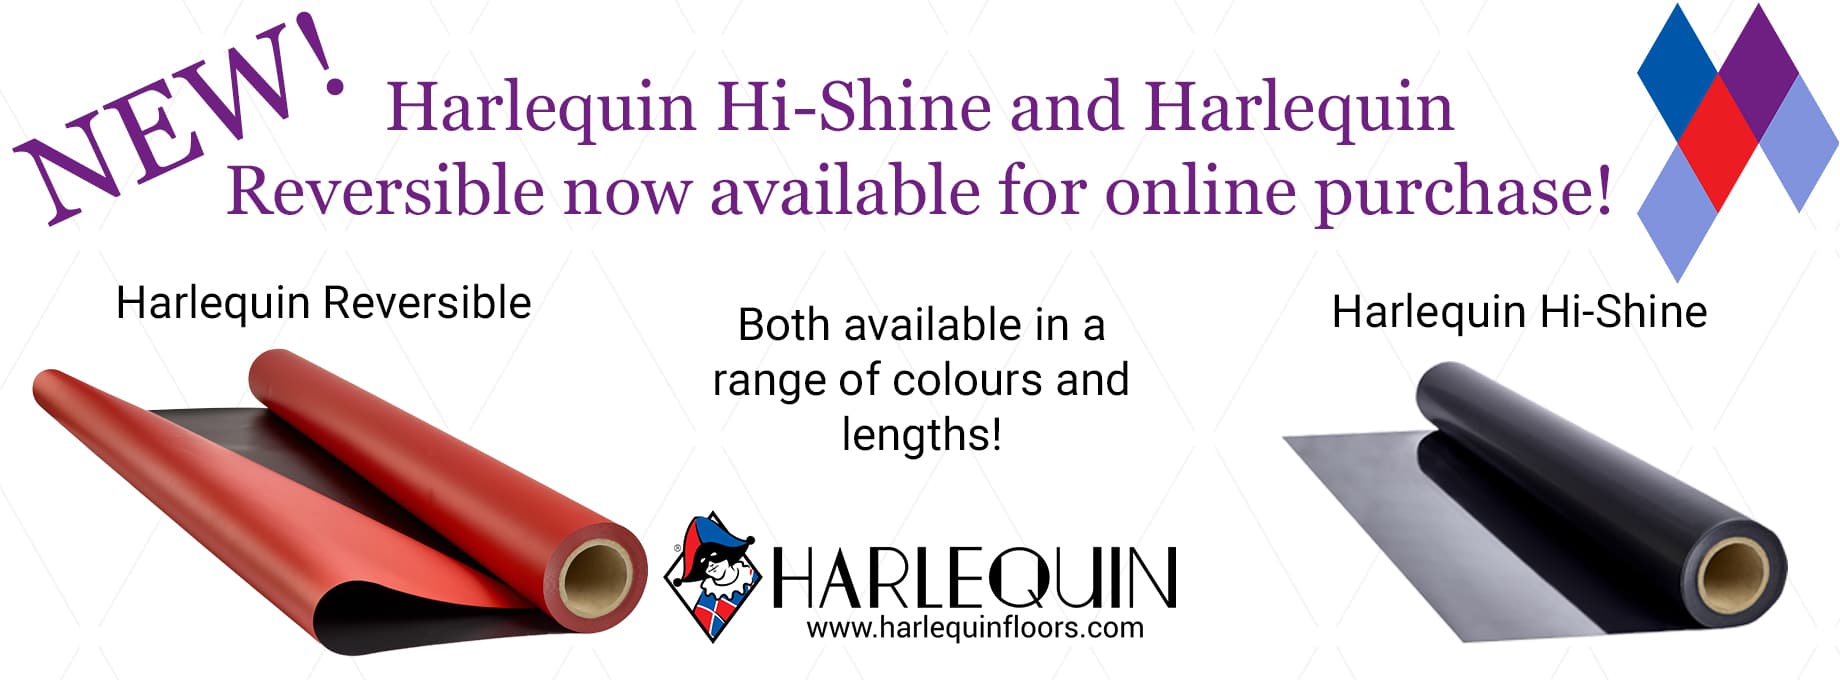 Vinyl rolls now available on the Harlequin Online Shop